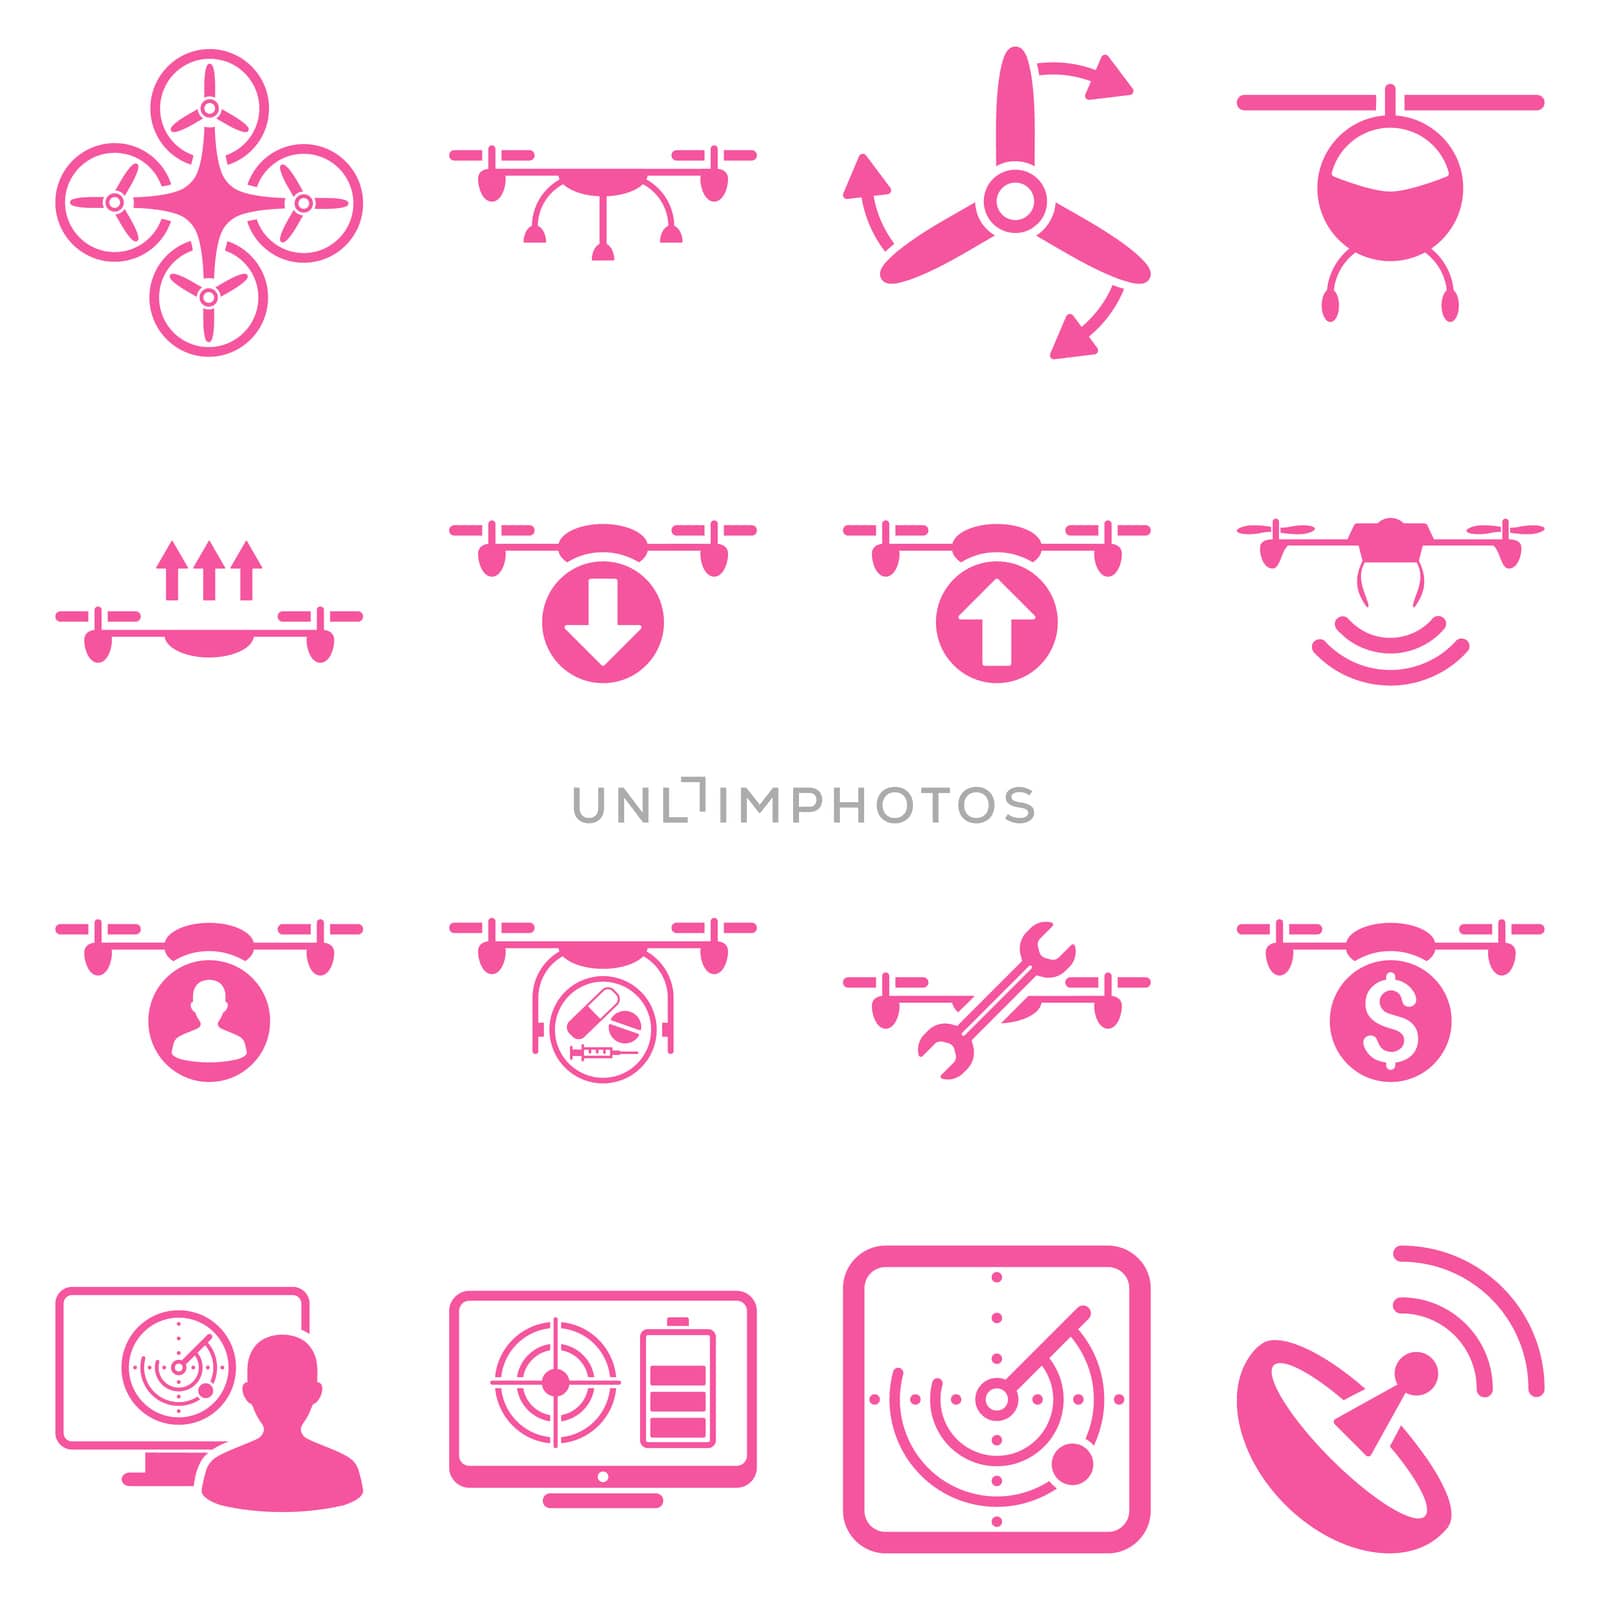 Quadcopter service icon set designed with pink color. These flat pictograms are isolated on a white background.